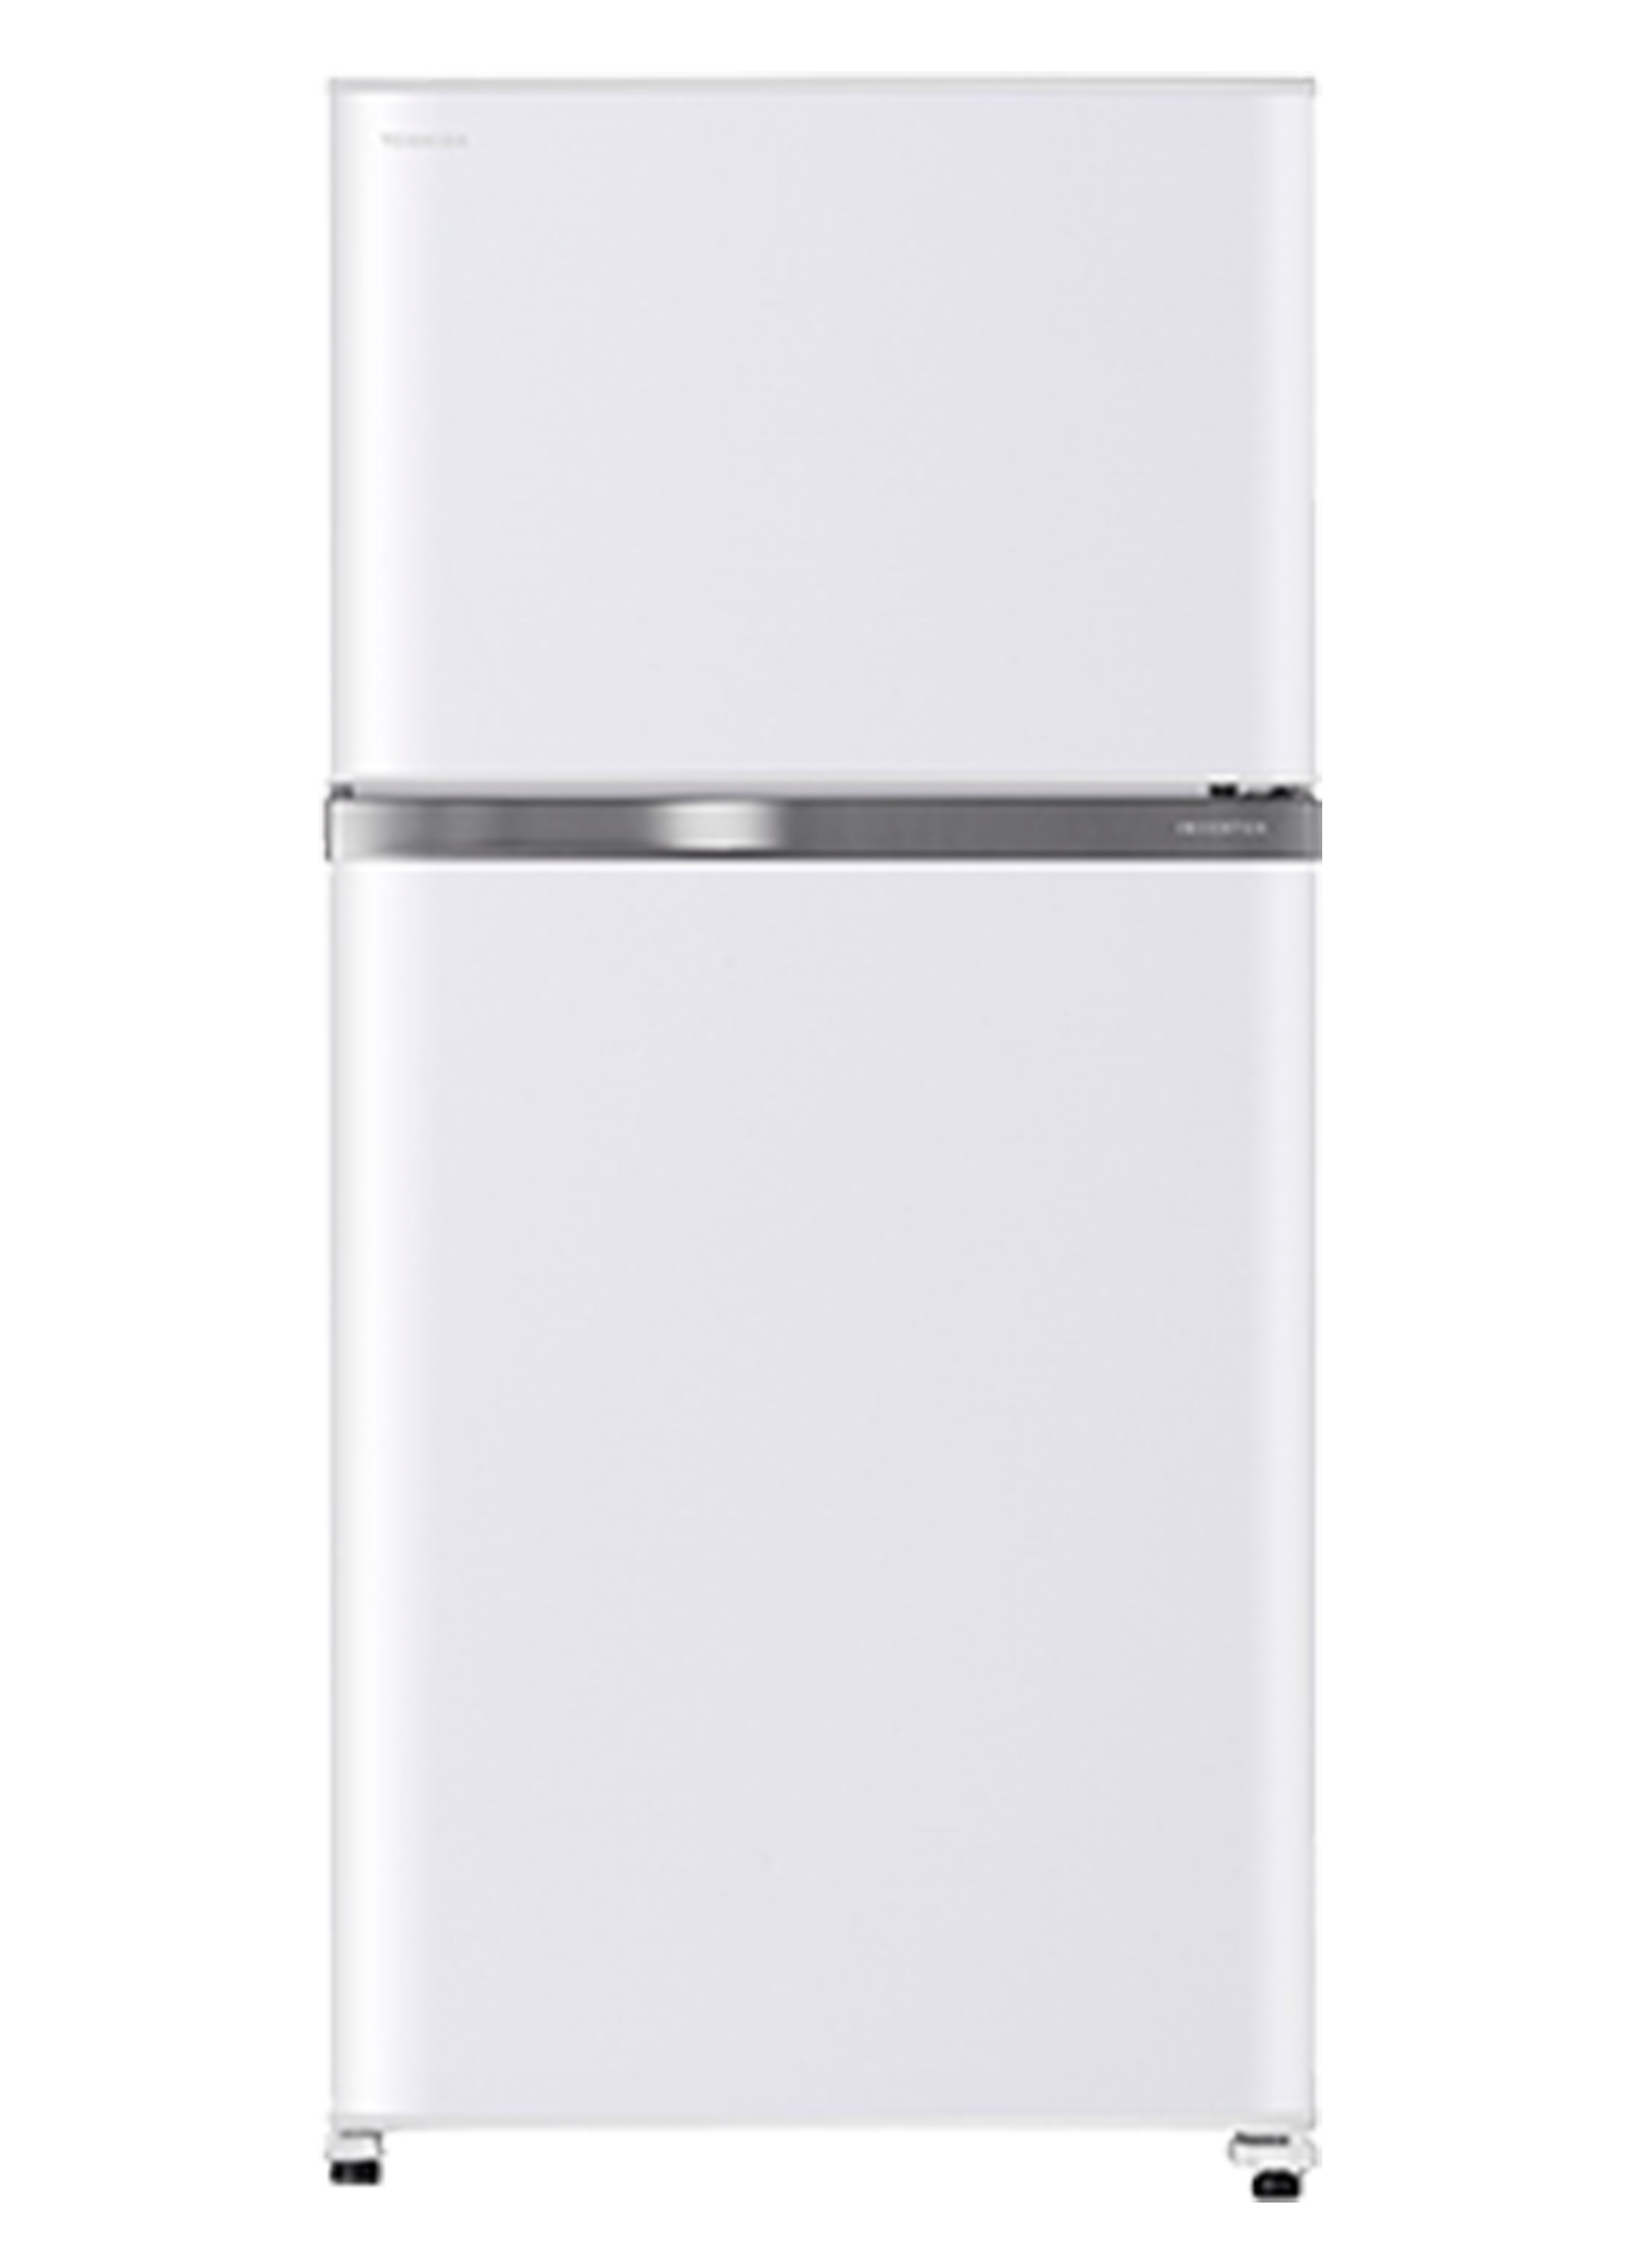 Refrigerator 554L Bright Stainless Steel